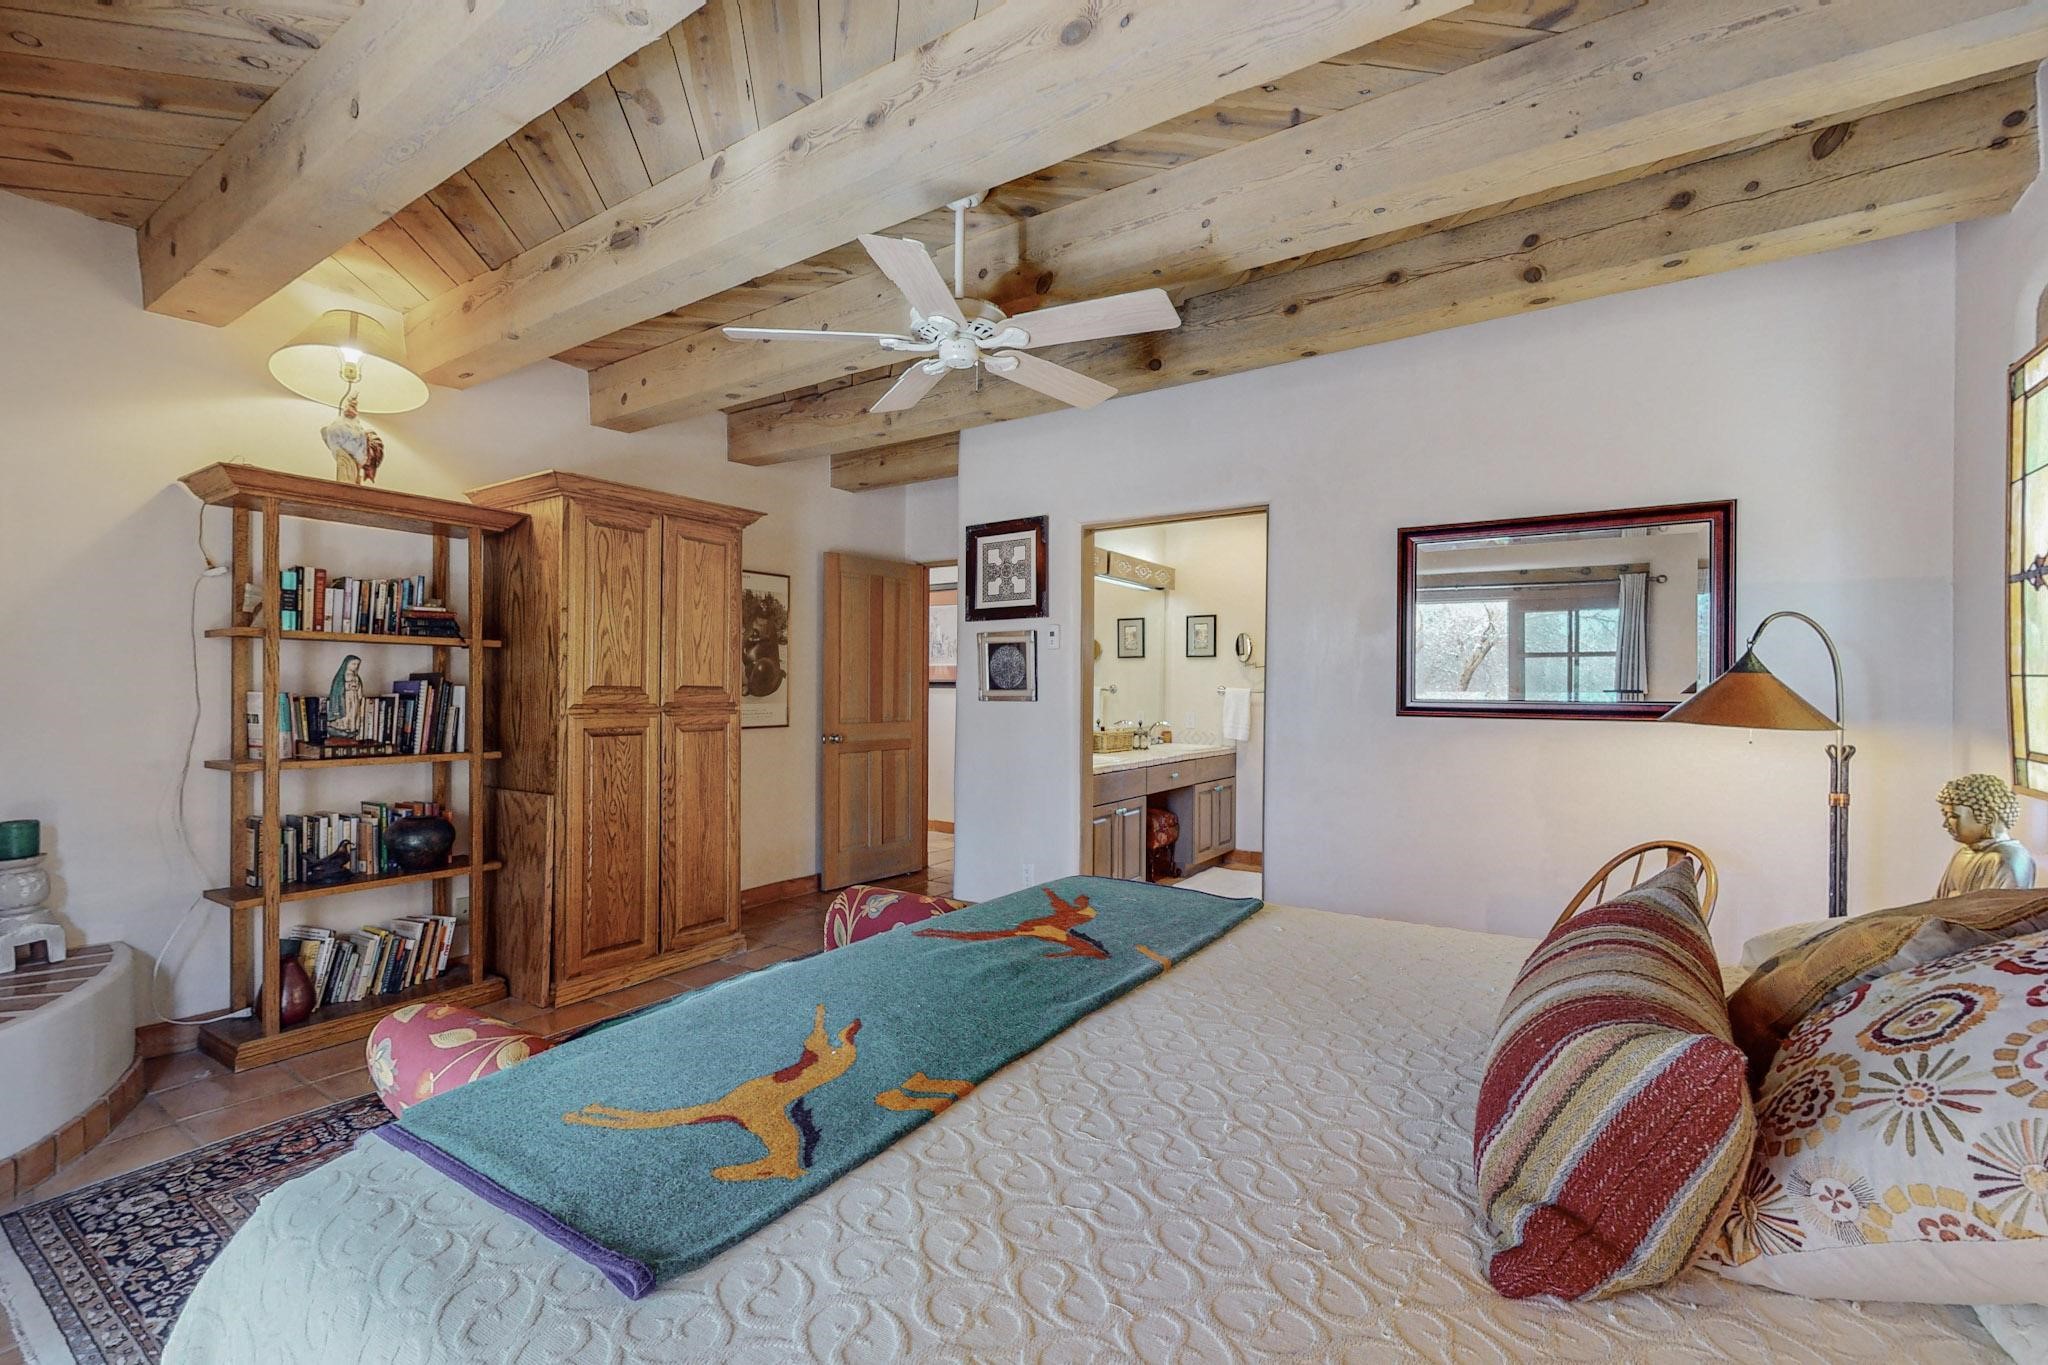 Primary bedroom with ceiling beams with tongue & groove wood planks.